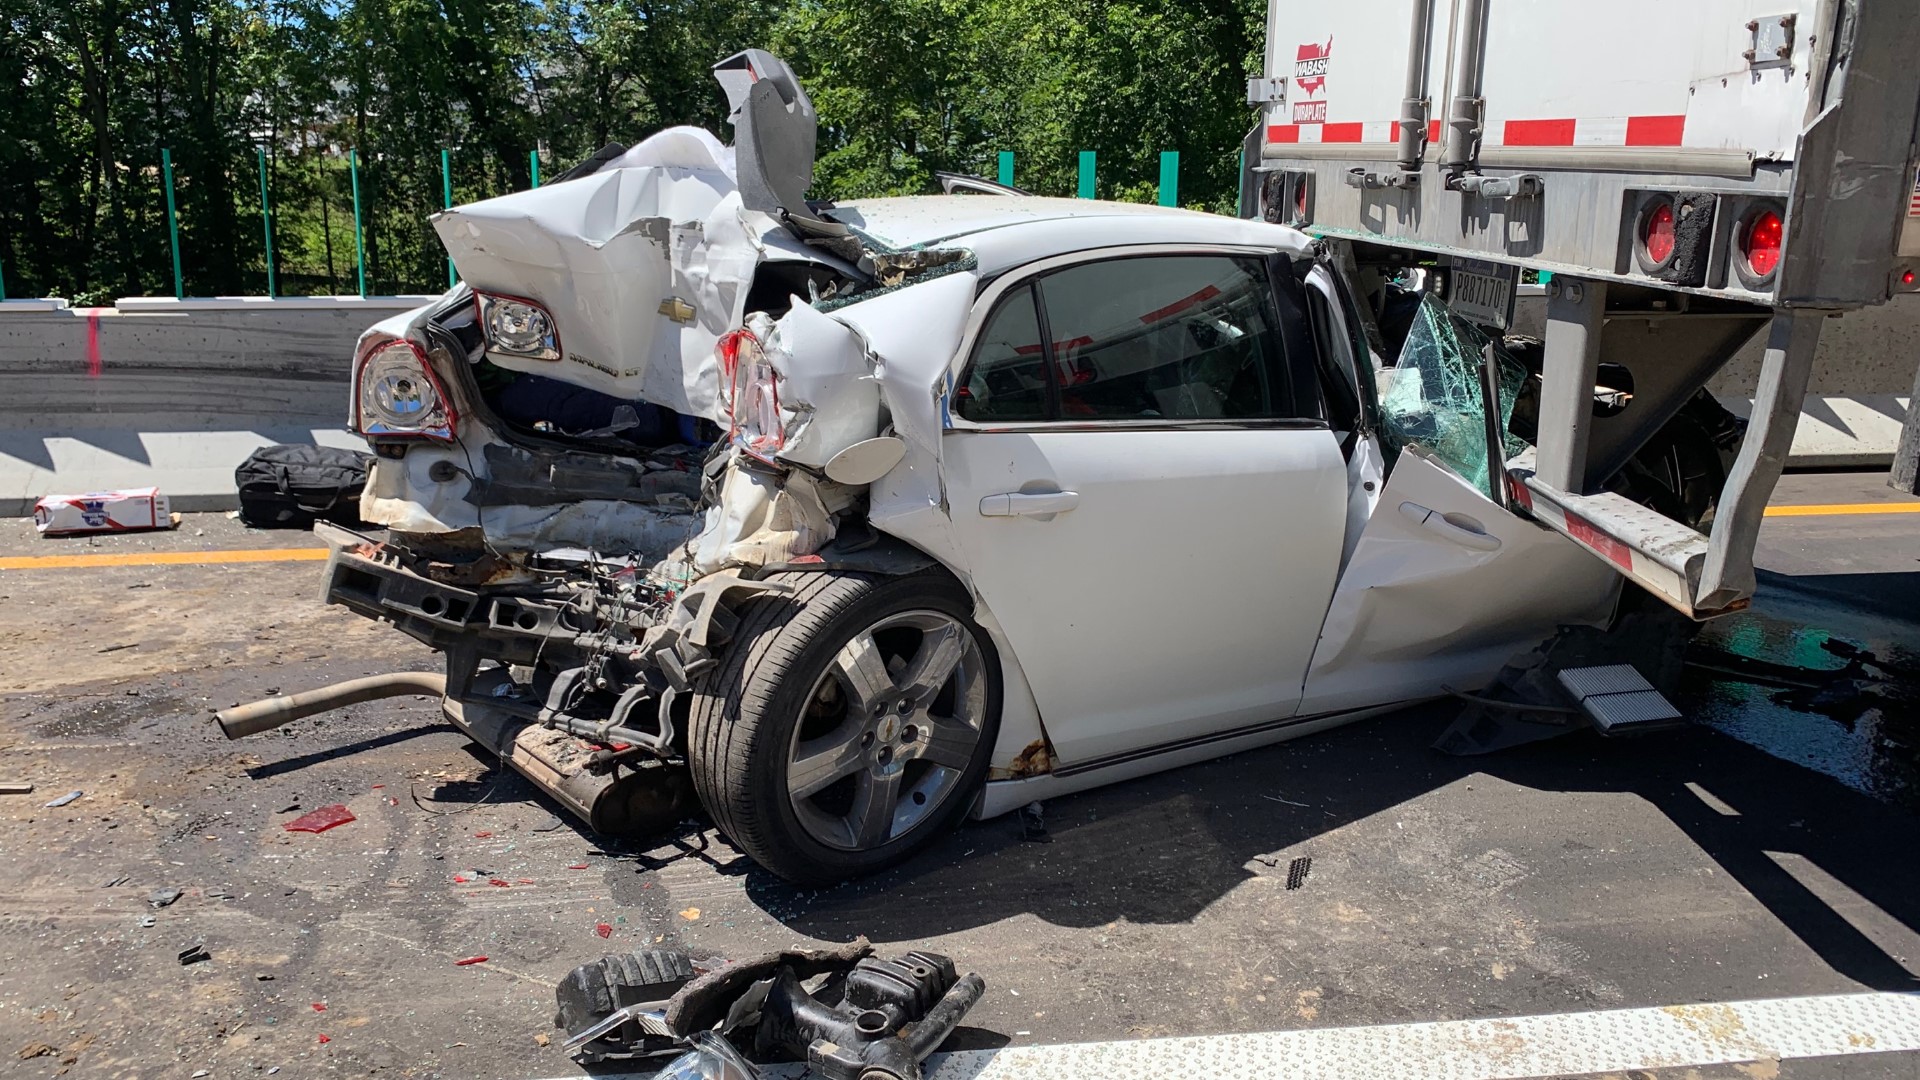 Three people sustained serious injuries after a car ran into the back of a semi that was stopped for construction backup. A 14-year-old later died from his injuries.